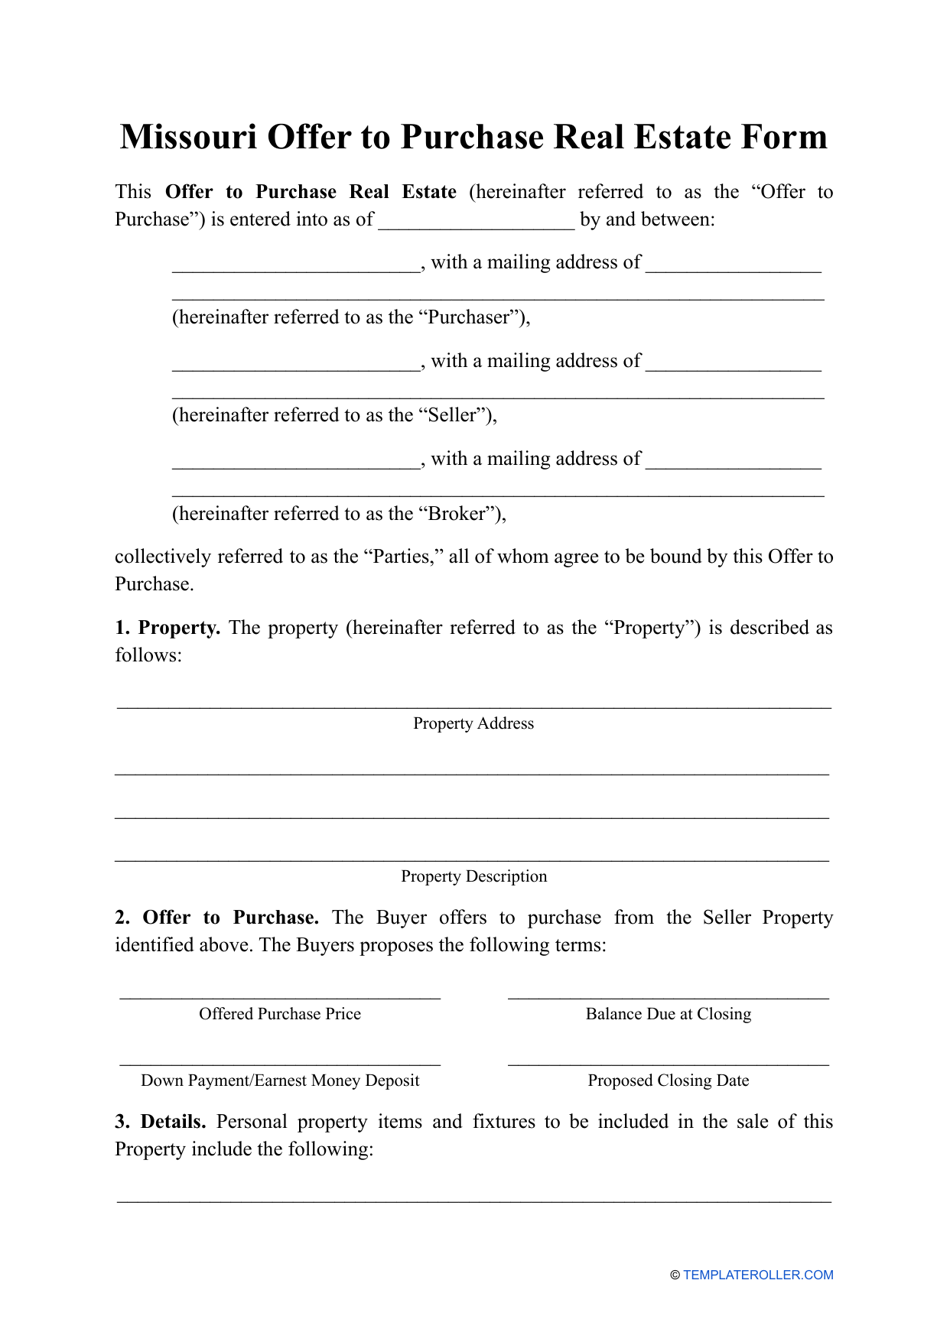 Offer to Purchase Real Estate Form - Missouri, Page 1